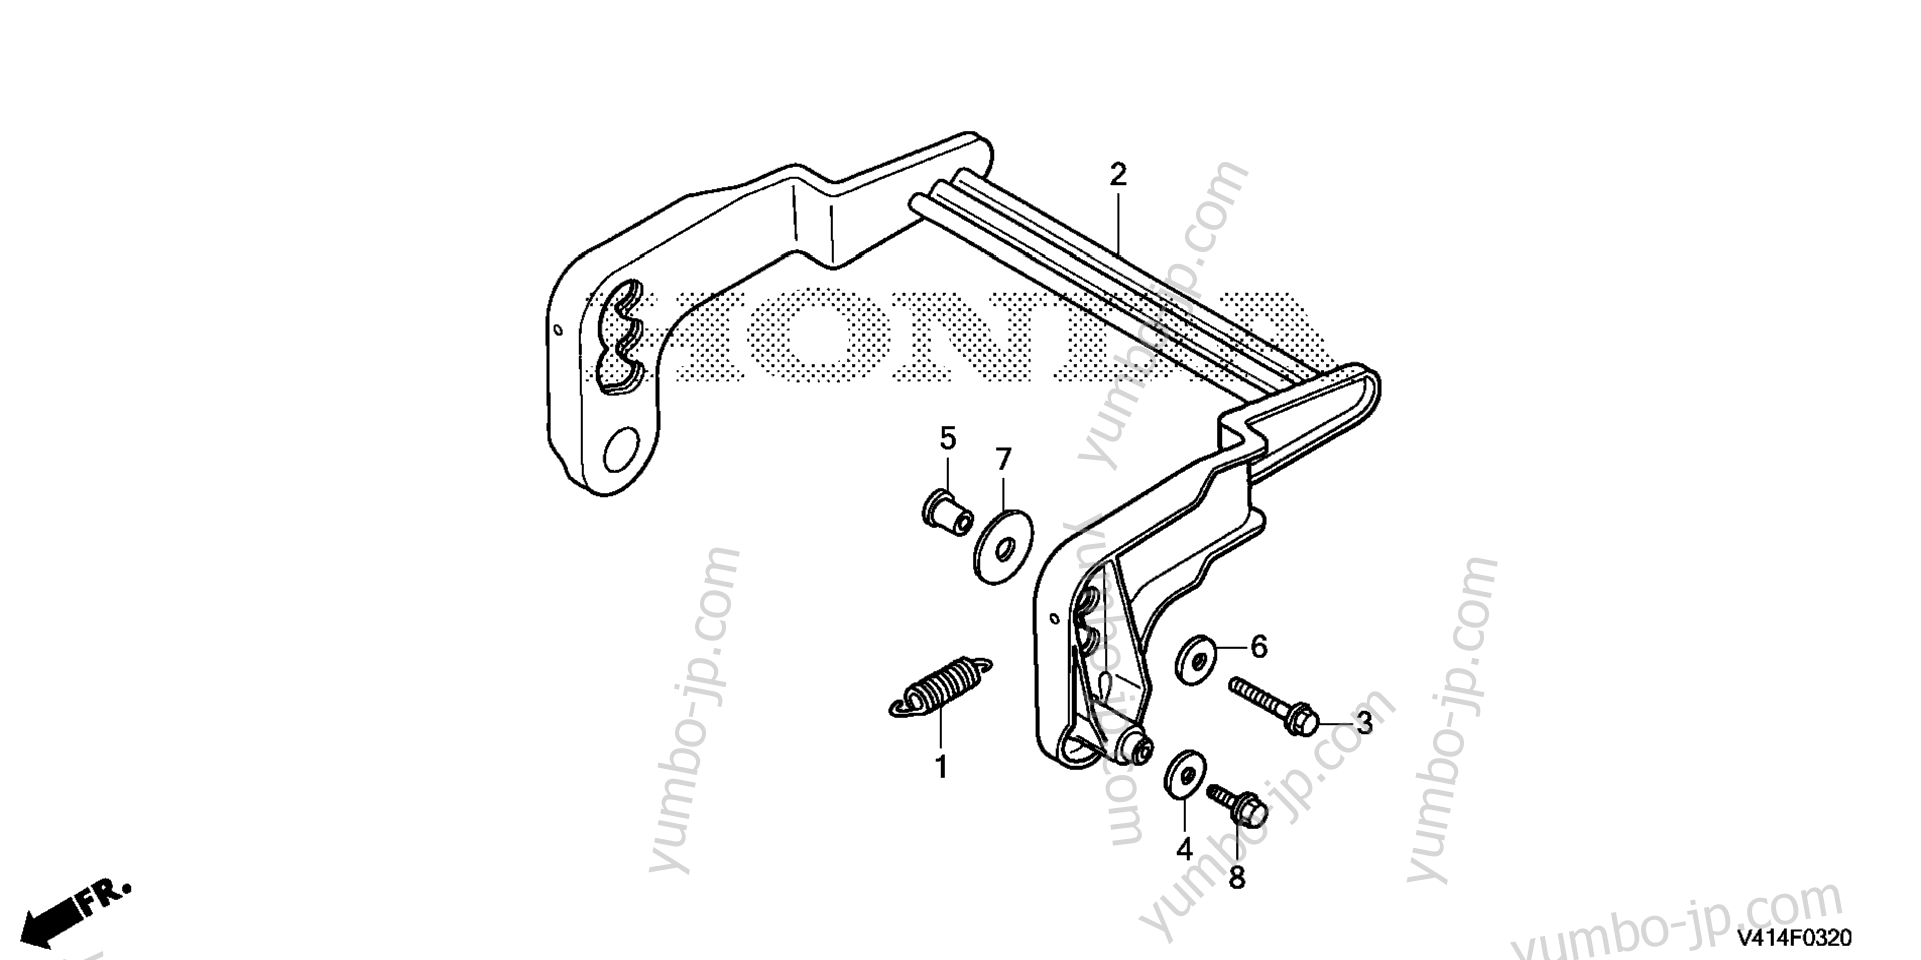 HEIGHT ADJUSTING PLATE for snow blowers HONDA HS1332 TA 